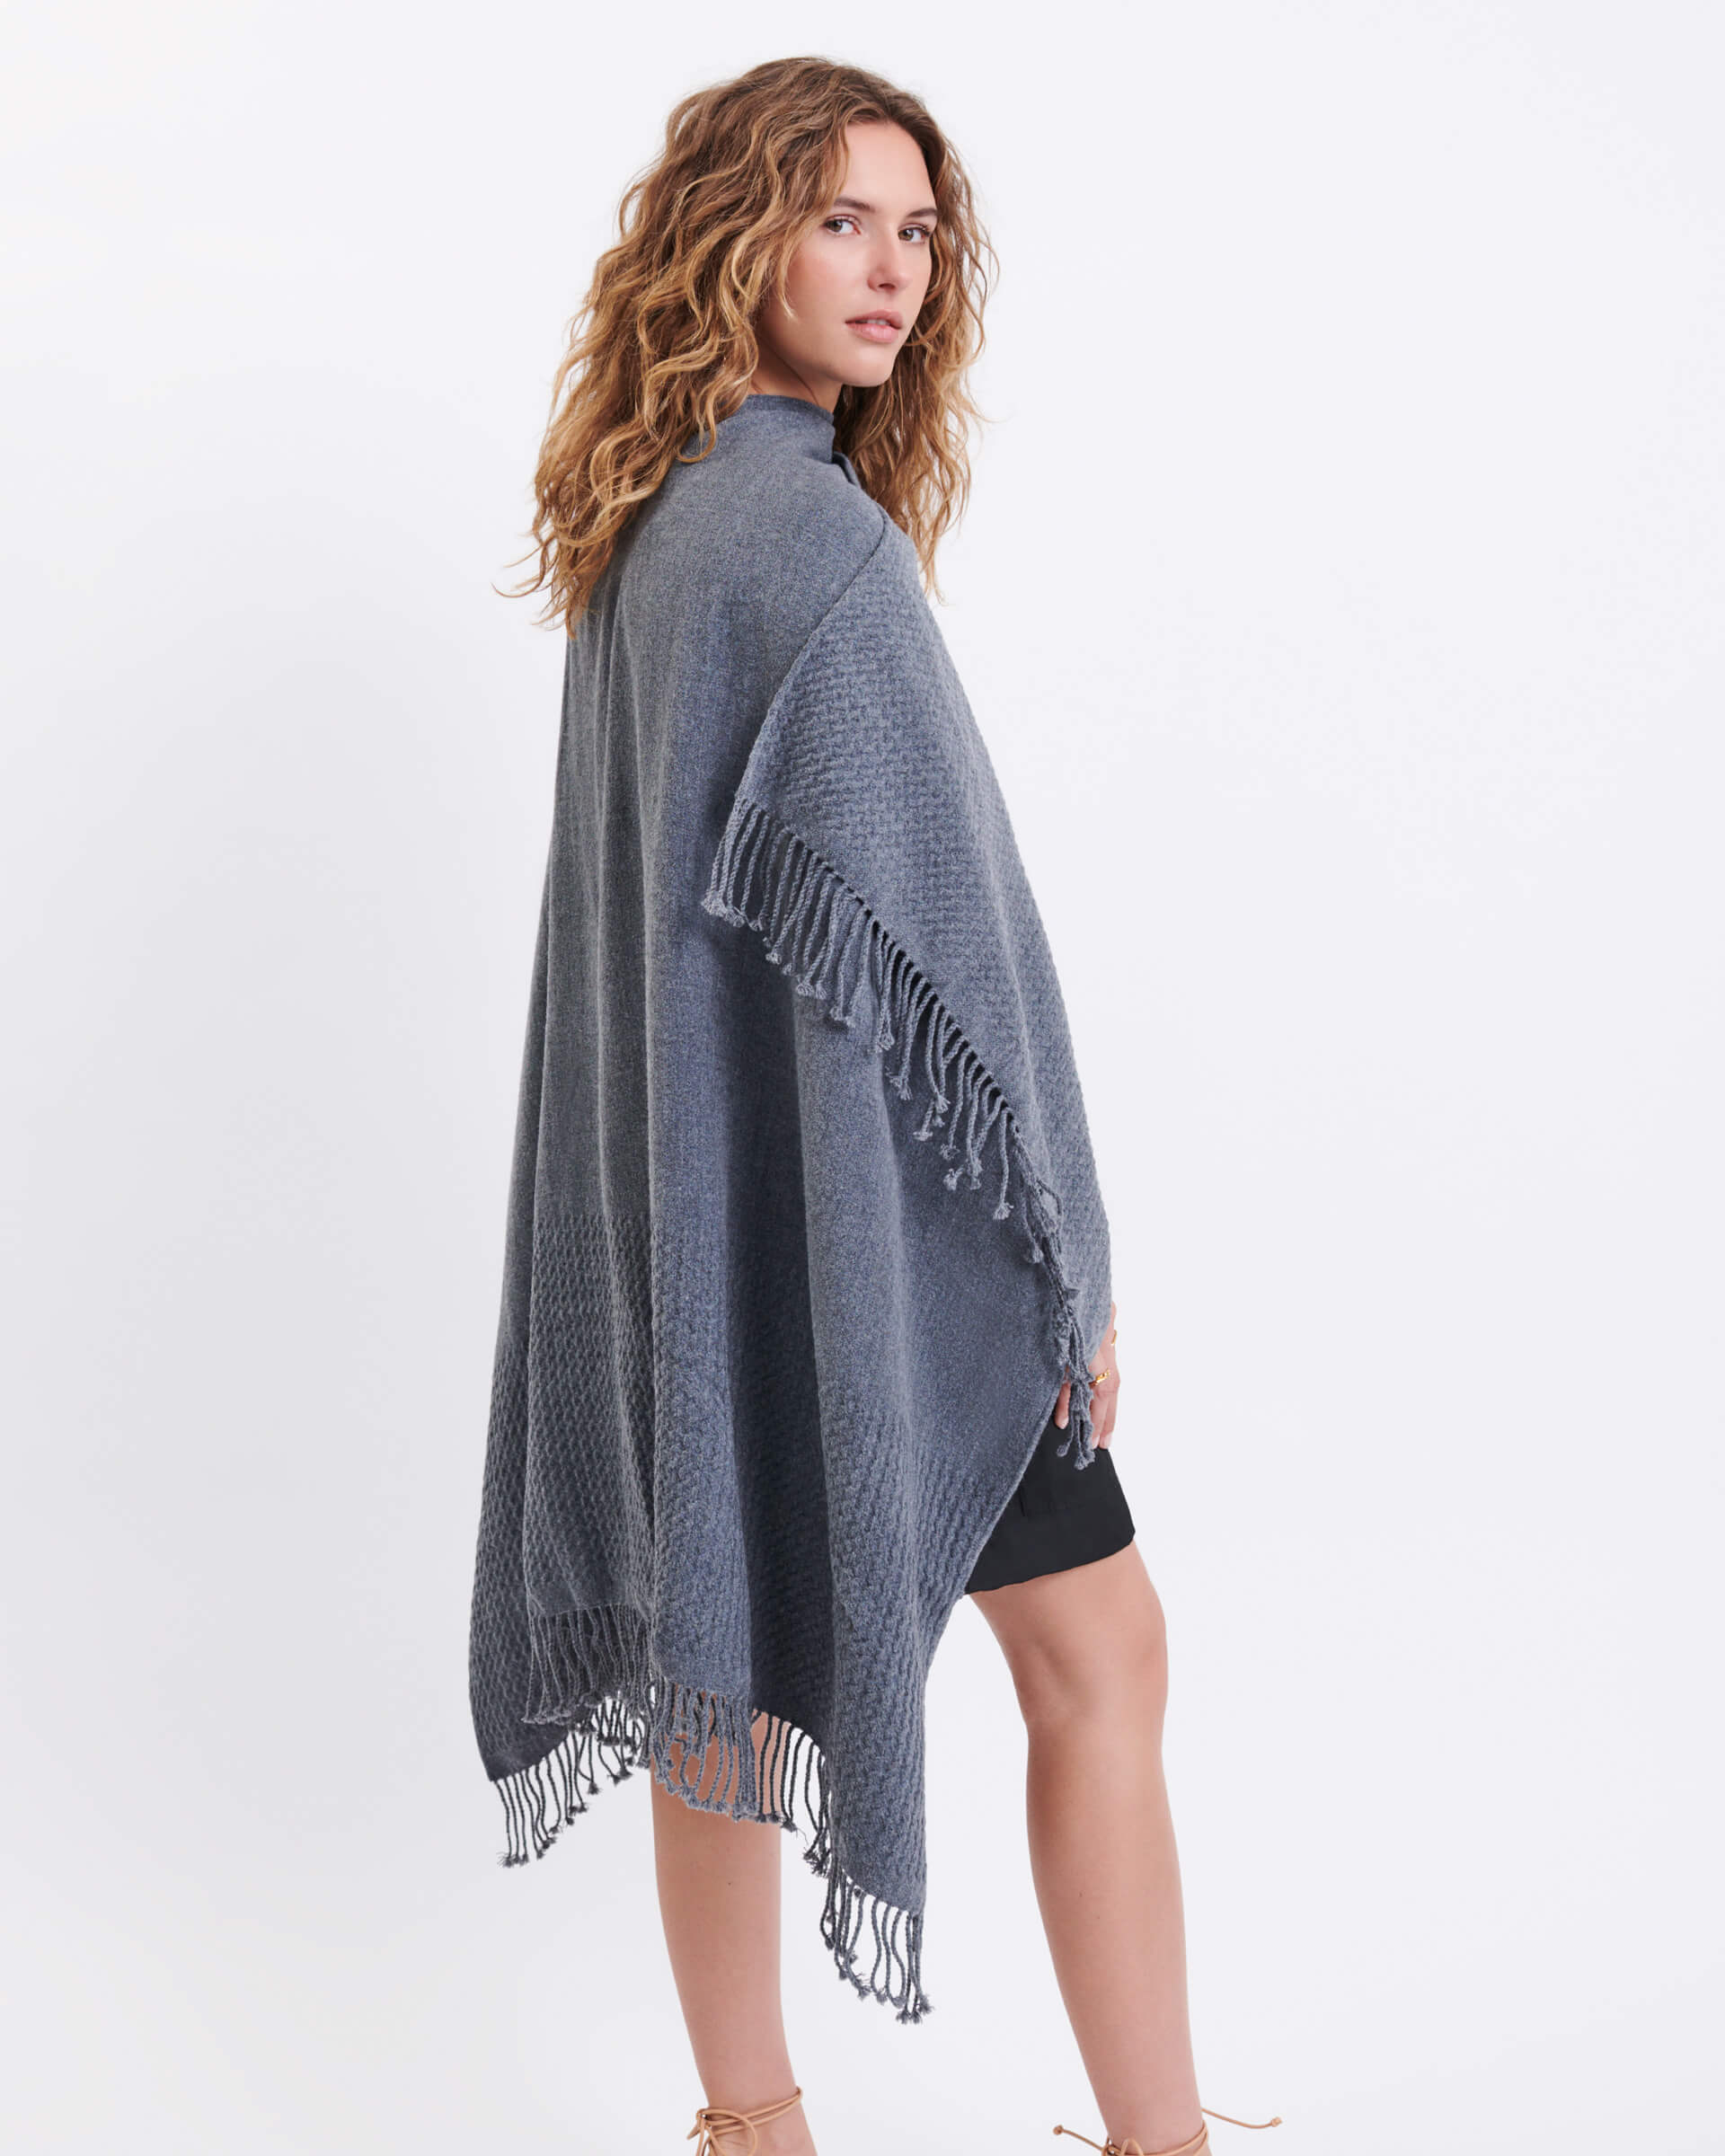 Women's One Size Gray Travel Wrap Side View Drape Over Shoulder